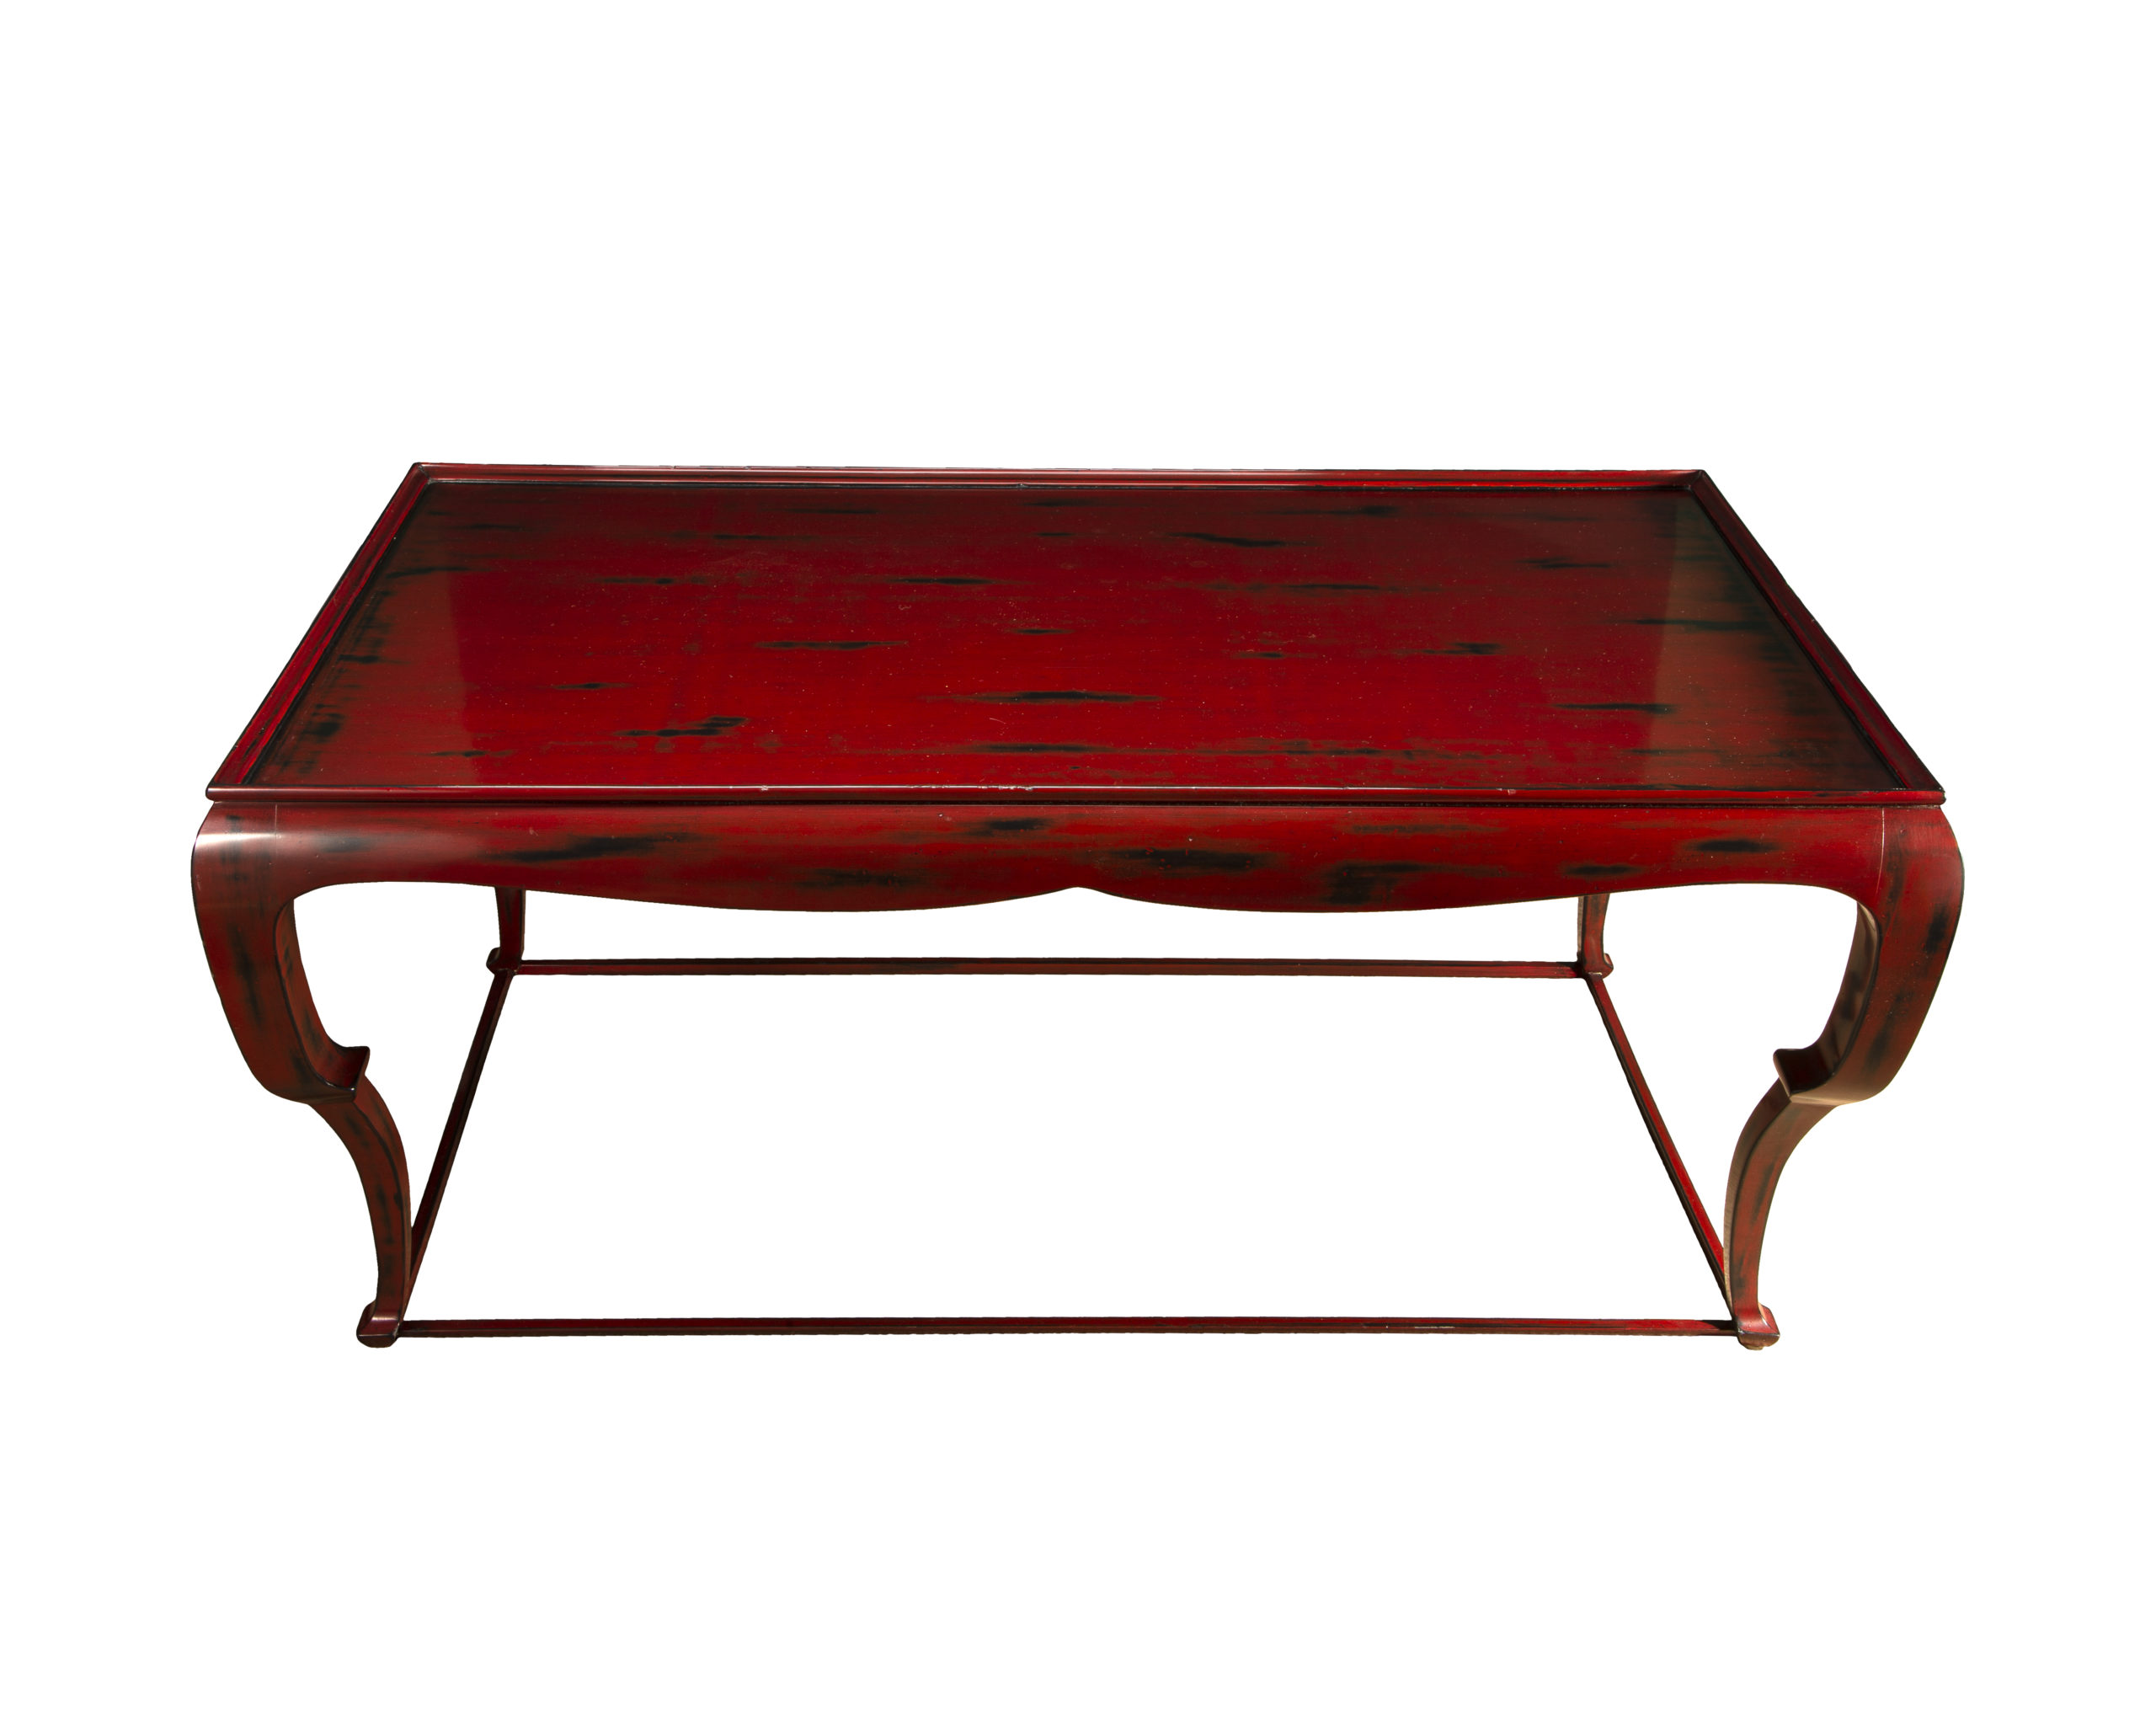 Tables - Beautiful 80's Red Asian Style Table 10749 - Rubbish Interiors Inc.